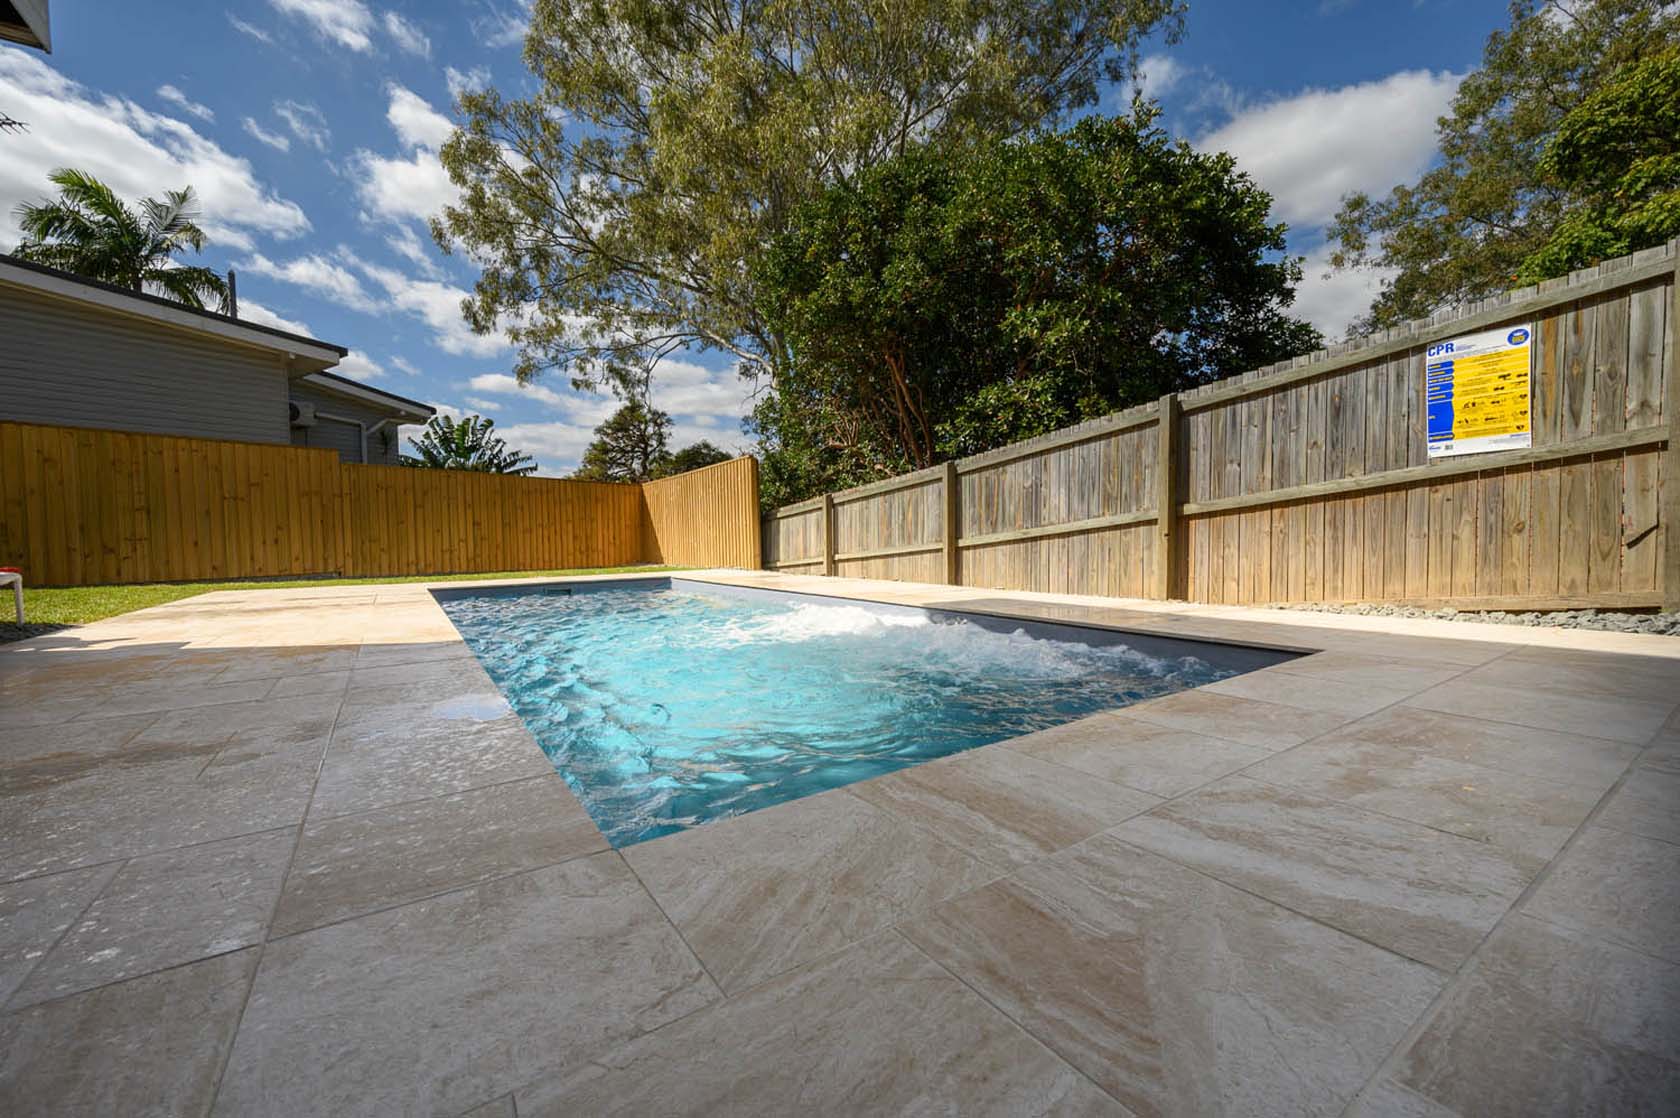 Latte Marblano Porcelain pool coping and surround tiles